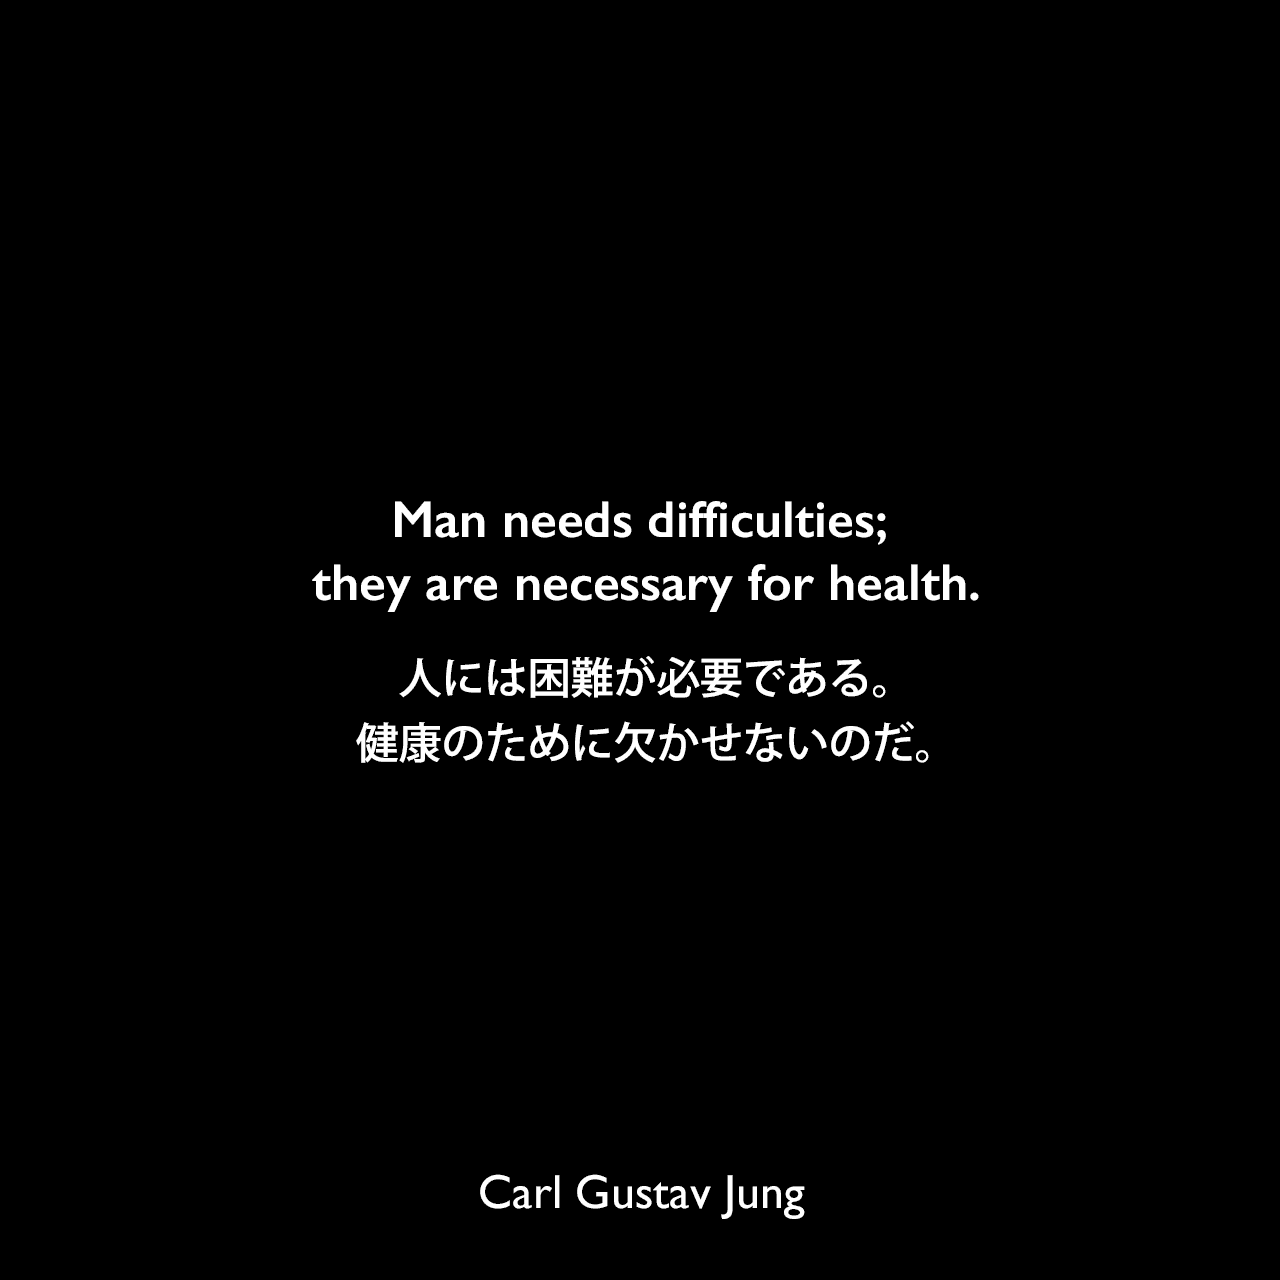 Man needs difficulties; they are necessary for health.人には困難が必要である。健康のために欠かせないのだ。